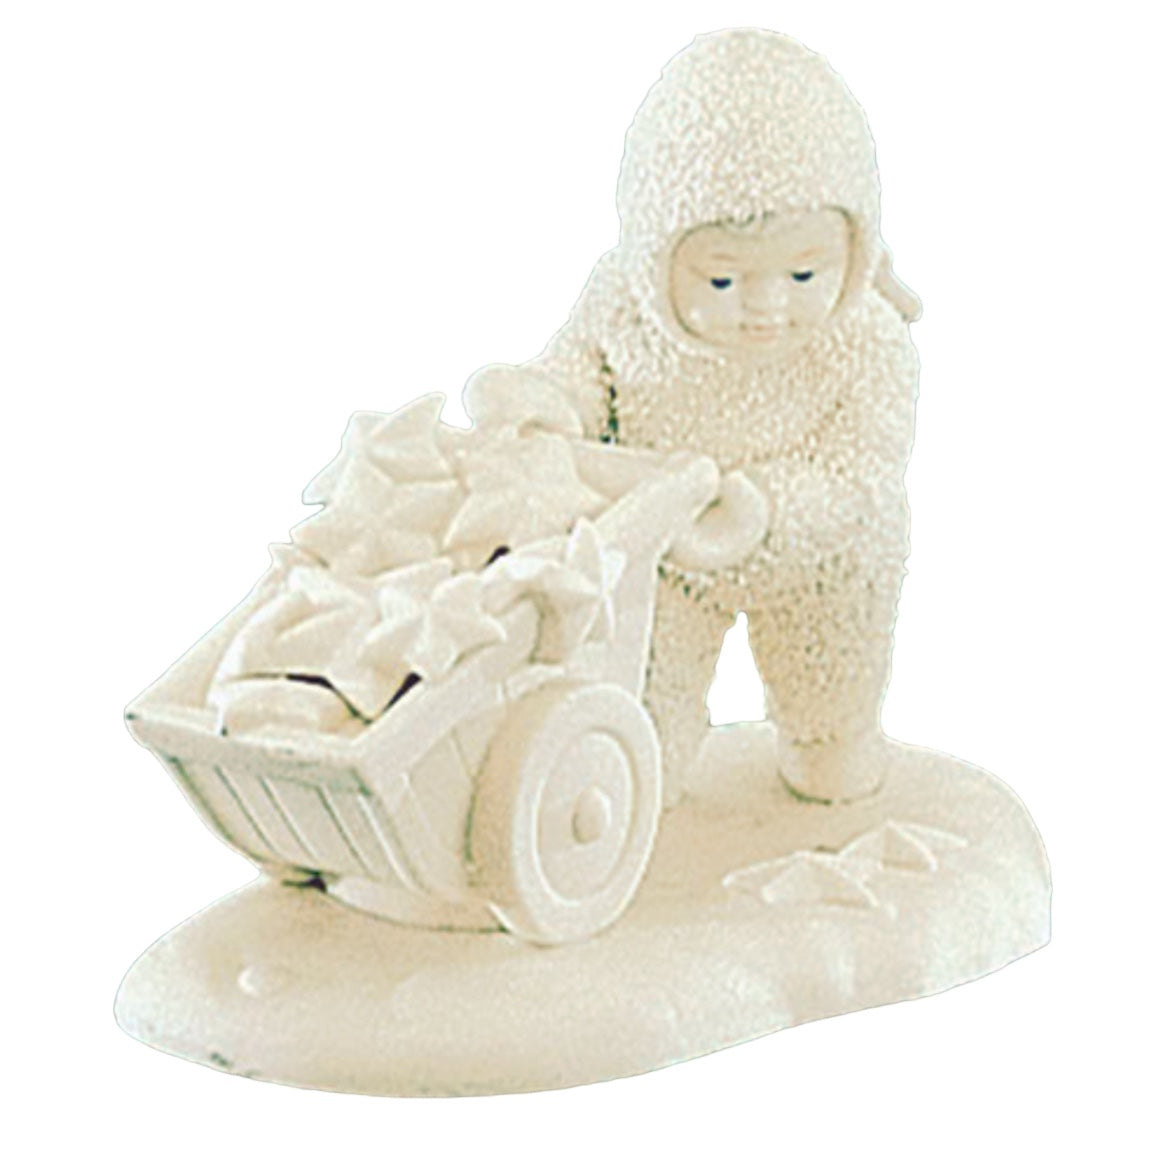 Snowbabies - There's Another One! Figurine